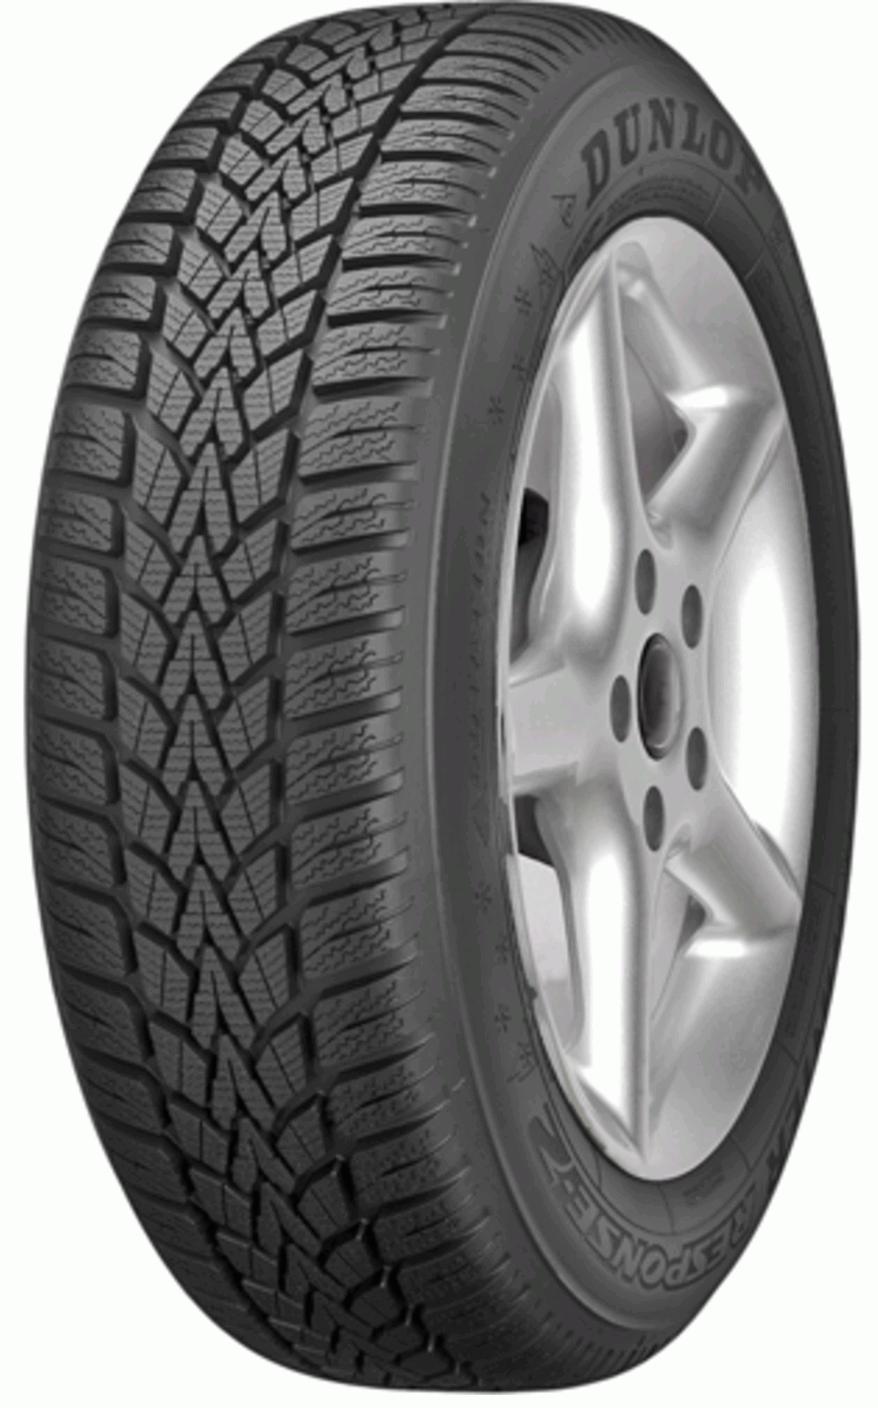 Dunlop Winter Response 2 Tire and - Reviews Tests